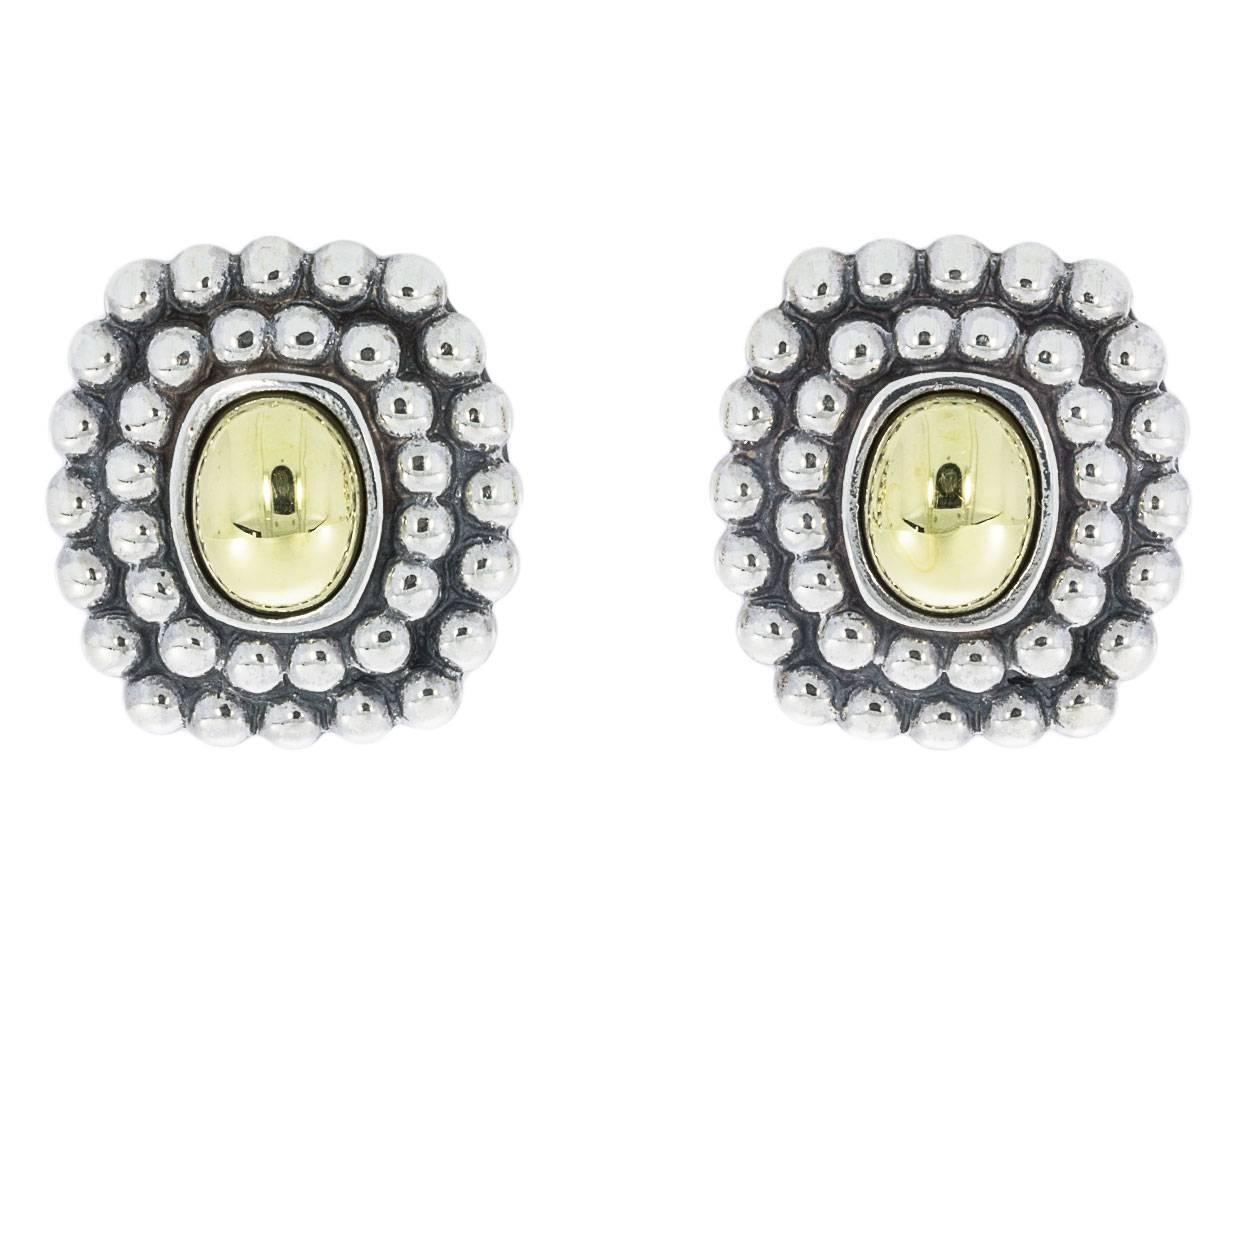 Lagos Caviar Sterling Silver and 18 Karat Yellow Gold Dome Centre Earrings